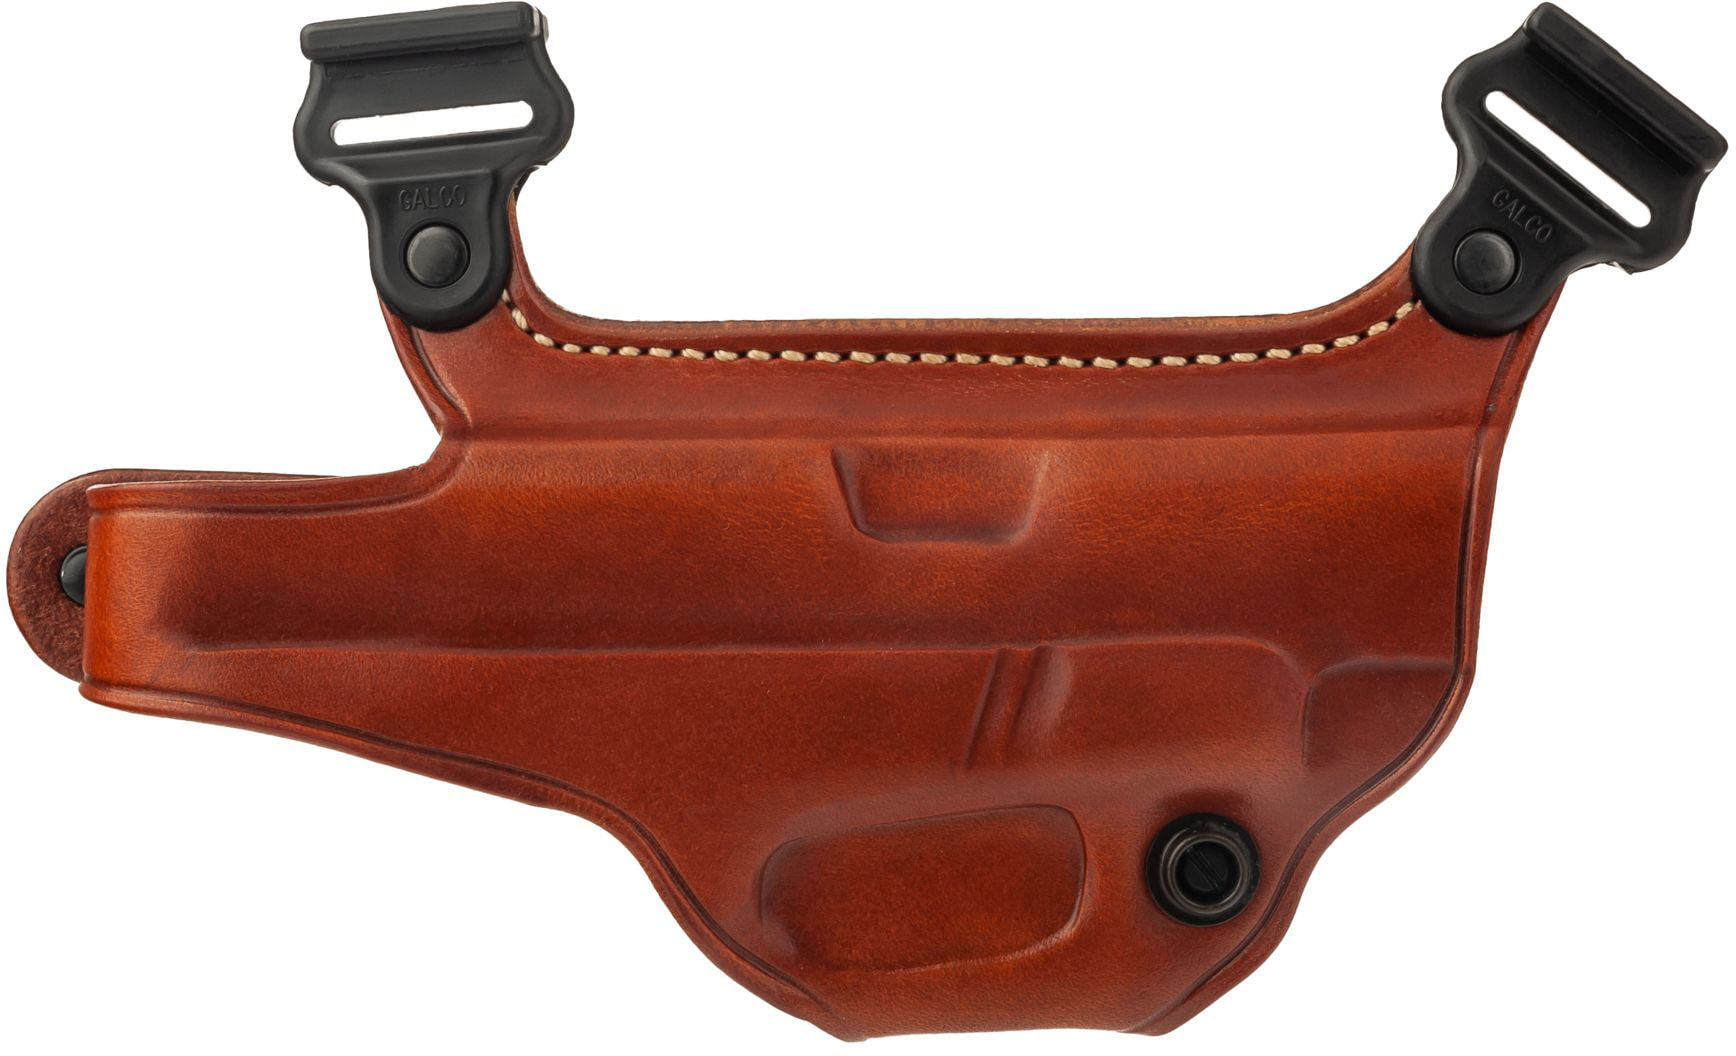 Galco S3H Shoulder Holster Component - Right Hand Sig P229 - Tan 248